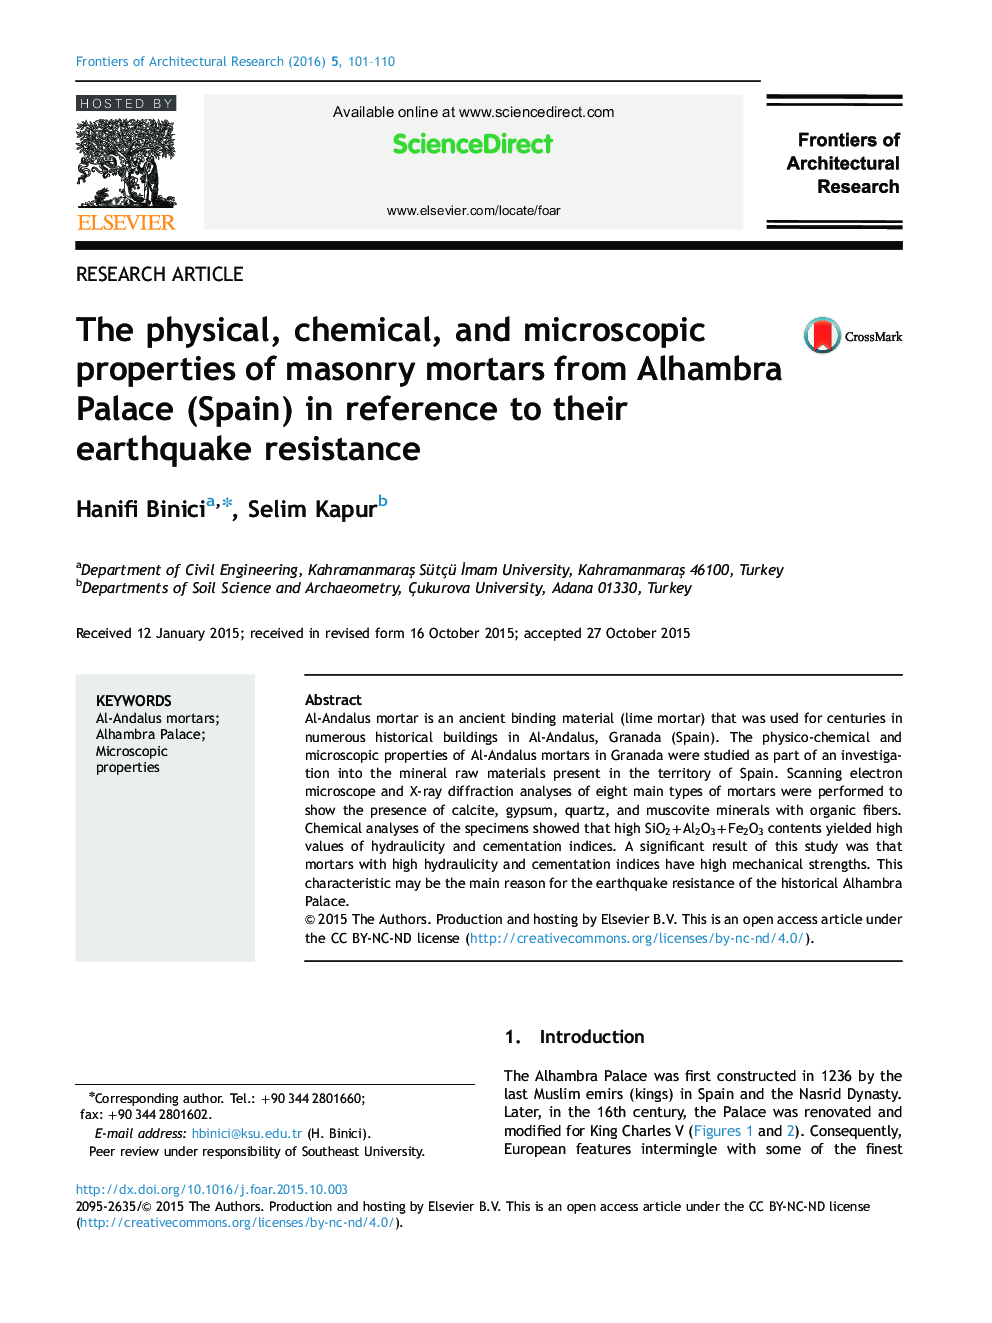 The physical, chemical, and microscopic properties of masonry mortars from Alhambra Palace (Spain) in reference to their earthquake resistance 